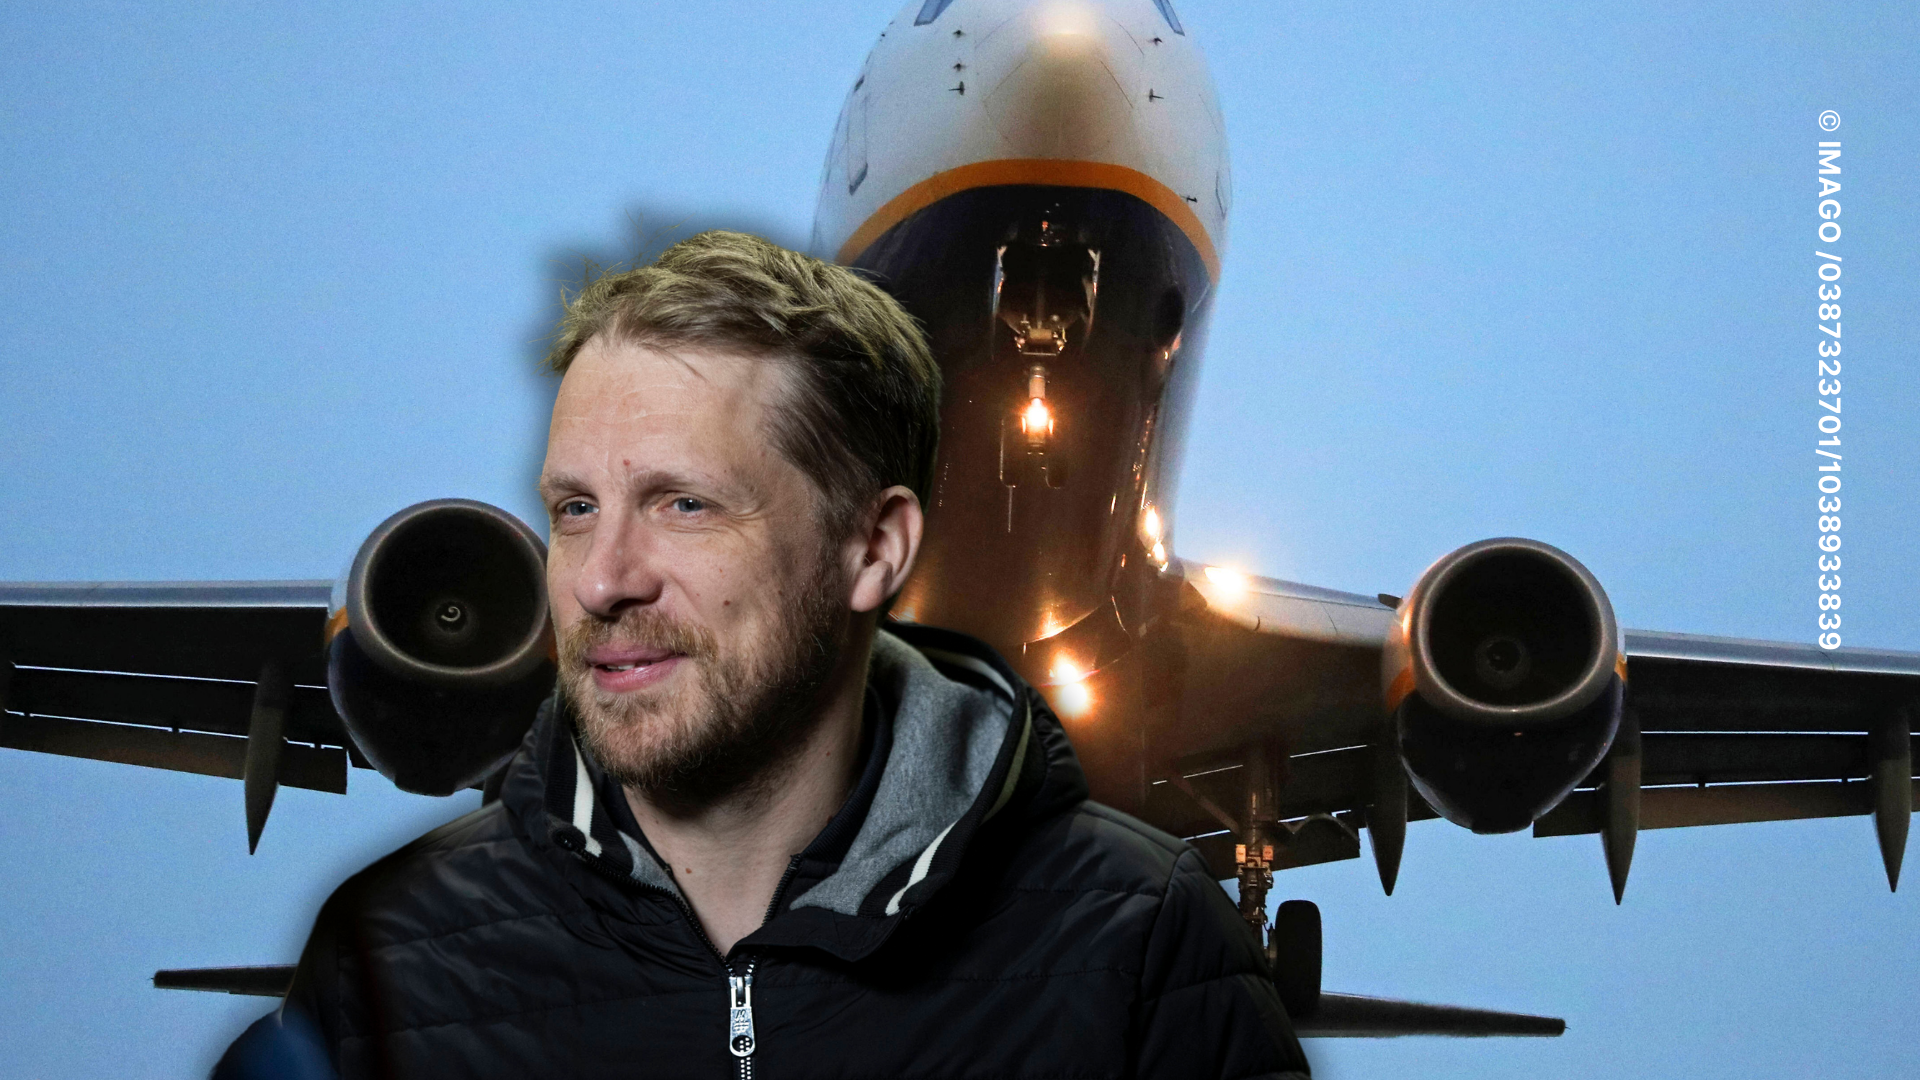 Technical error leads to Oliver Pocher's unplanned flight disruption over the Atlantic